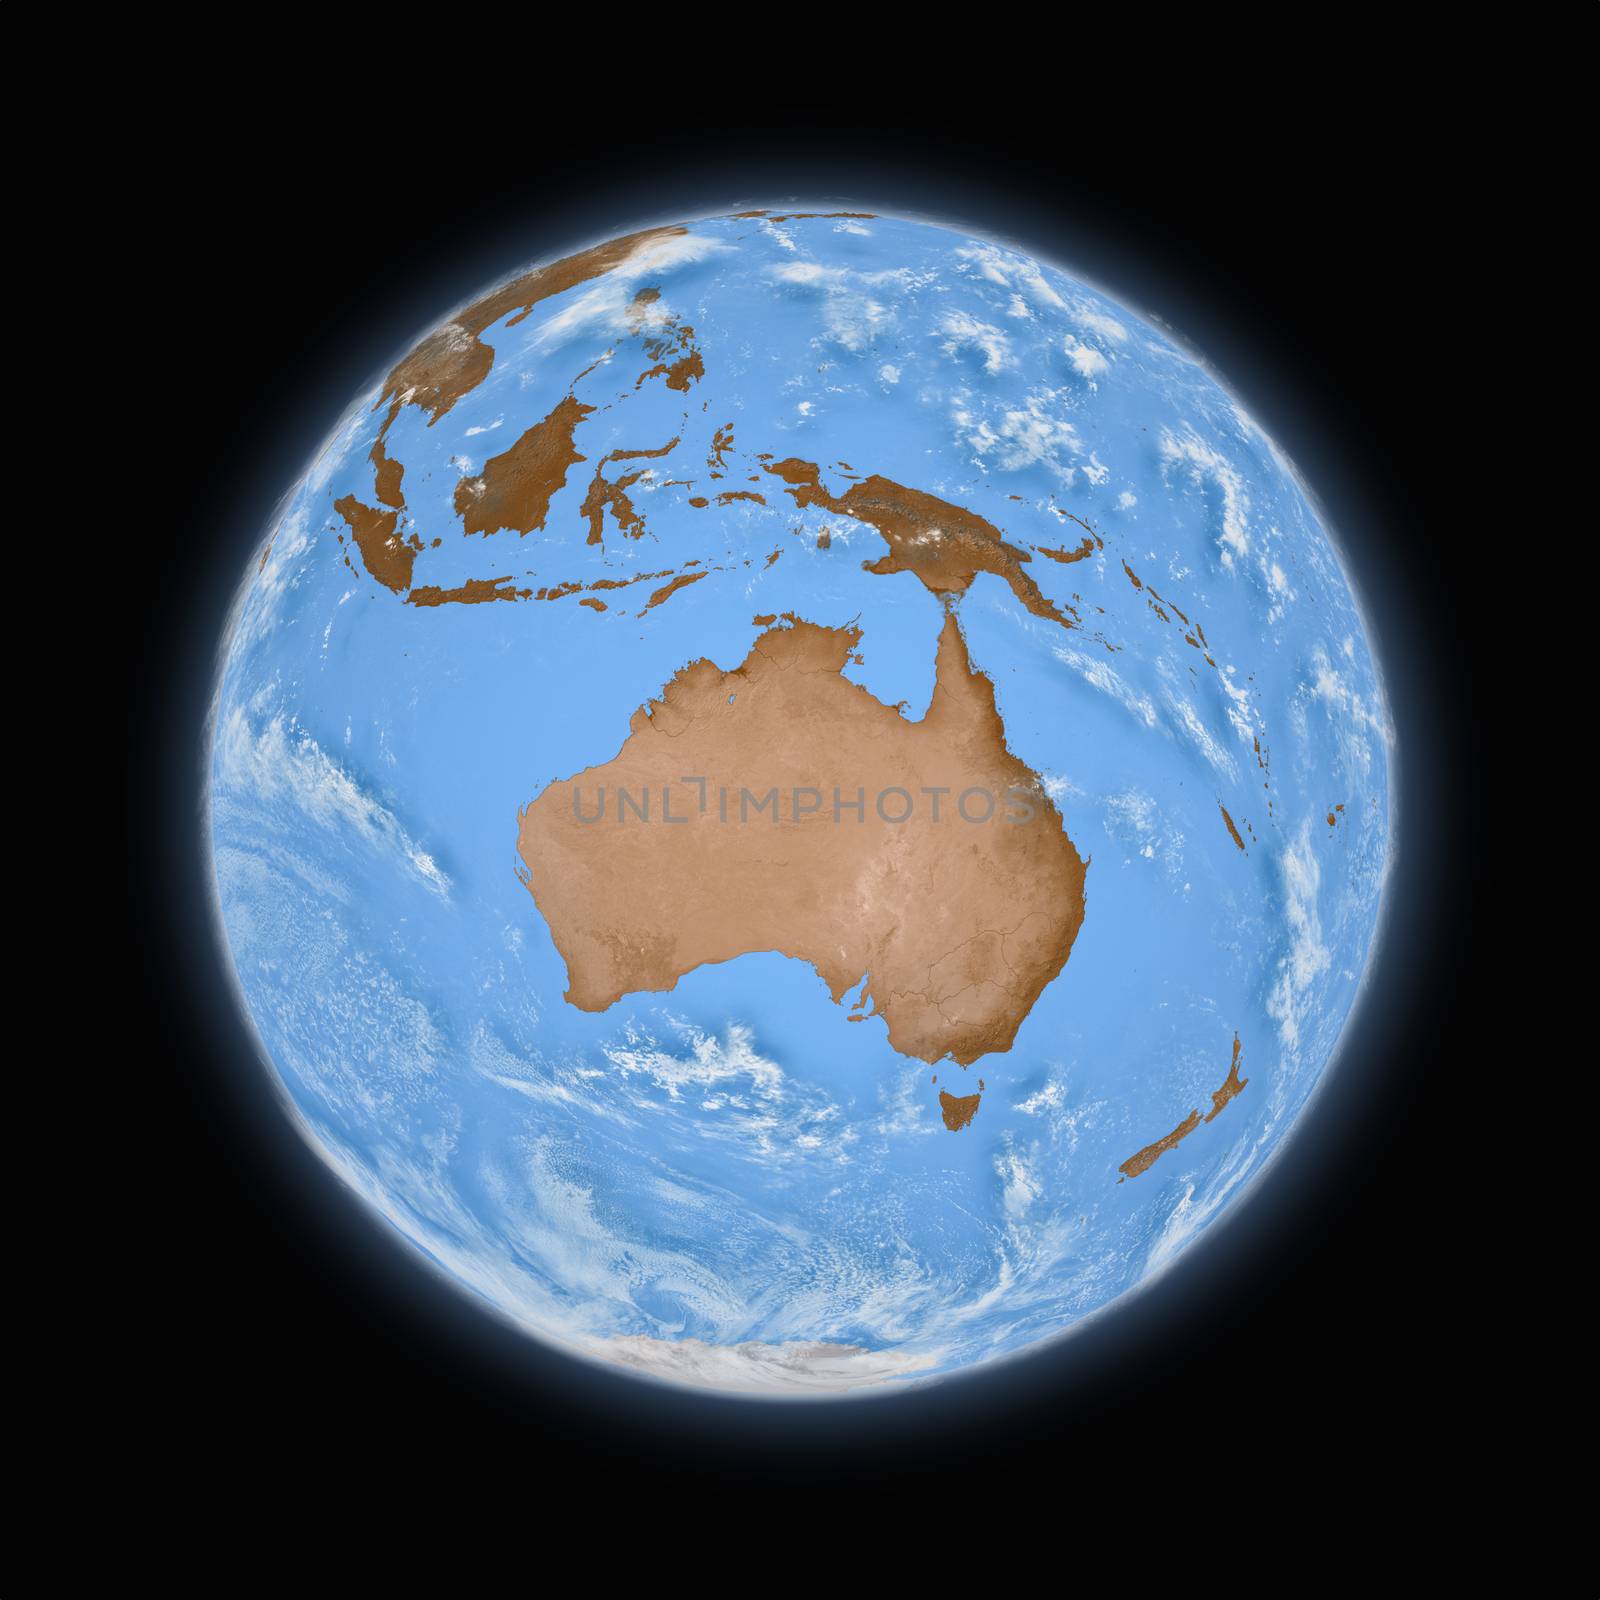 Australia on blue planet Earth isolated on black background. Highly detailed planet surface. Elements of this image furnished by NASA.